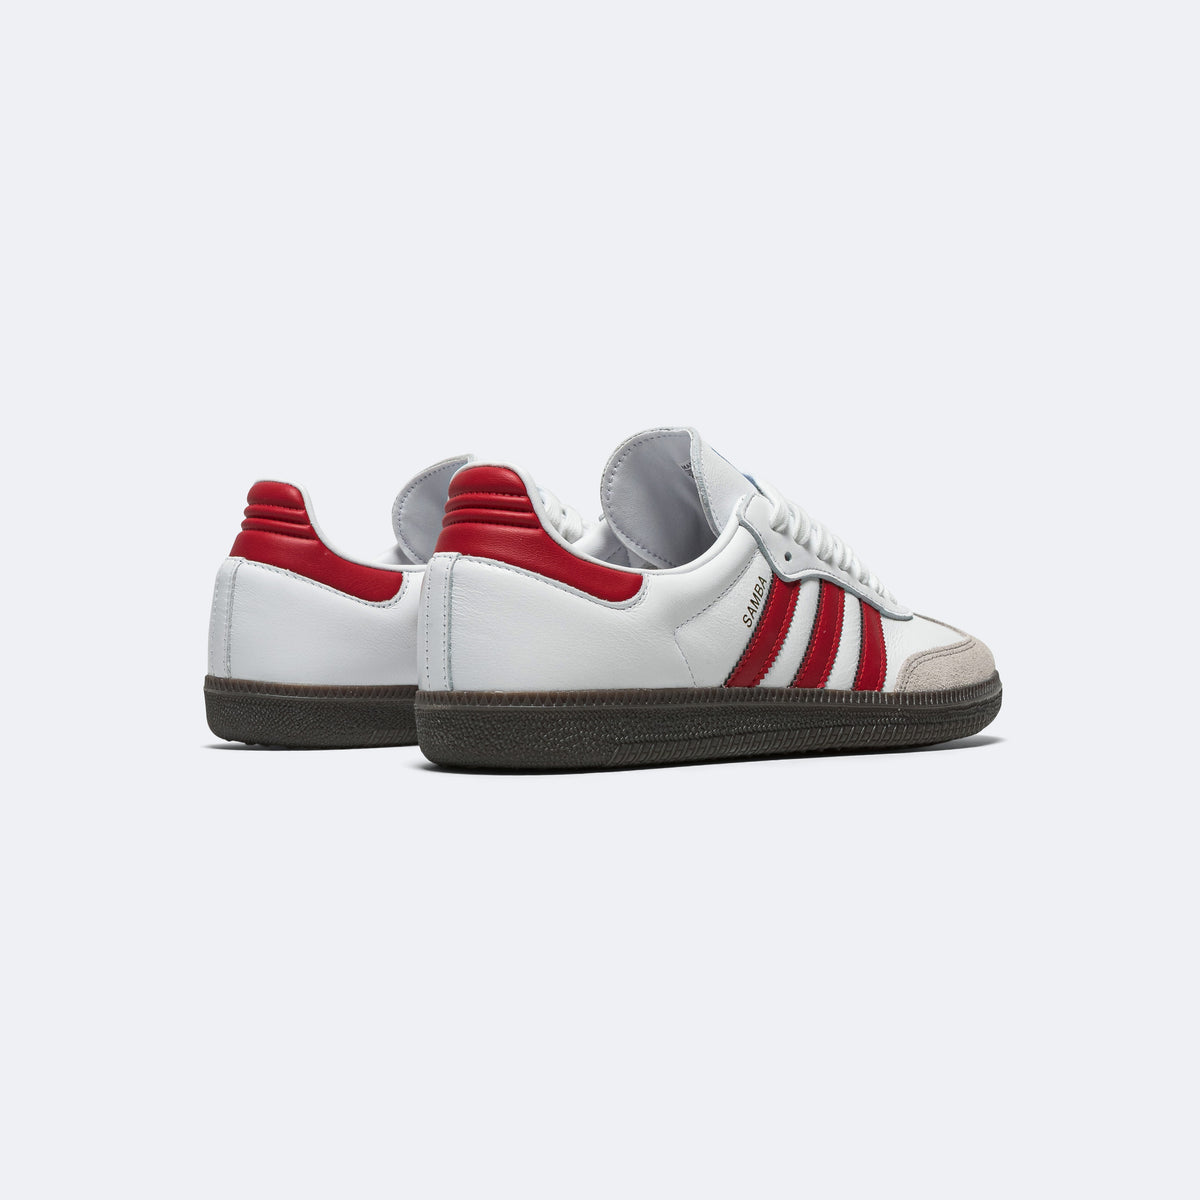 adidas Samba OG - Footwear White/Better Scarlet-Supcol | UP THERE